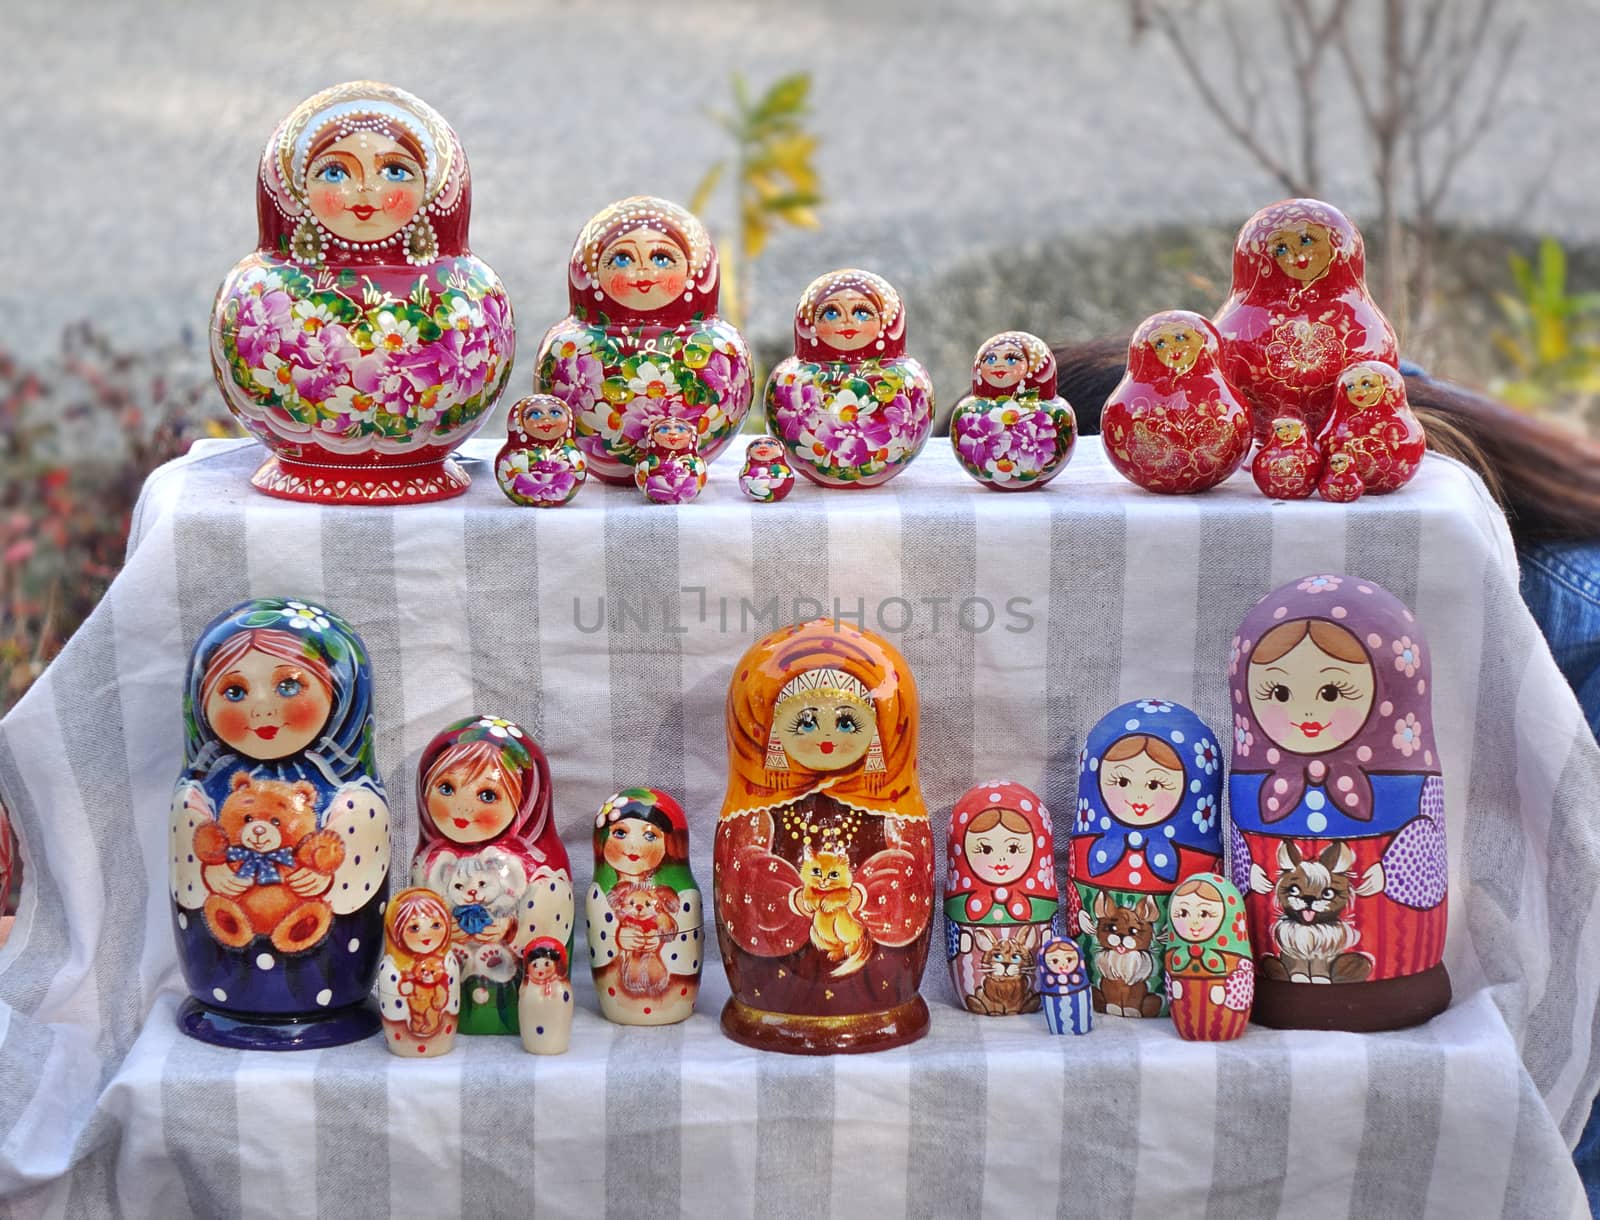 KAOHSIUNG, TAIWAN -- JANUARY 19, 2020: A street vendor sells Russian style wooden Matryoshka dolls in various colors and designs.
